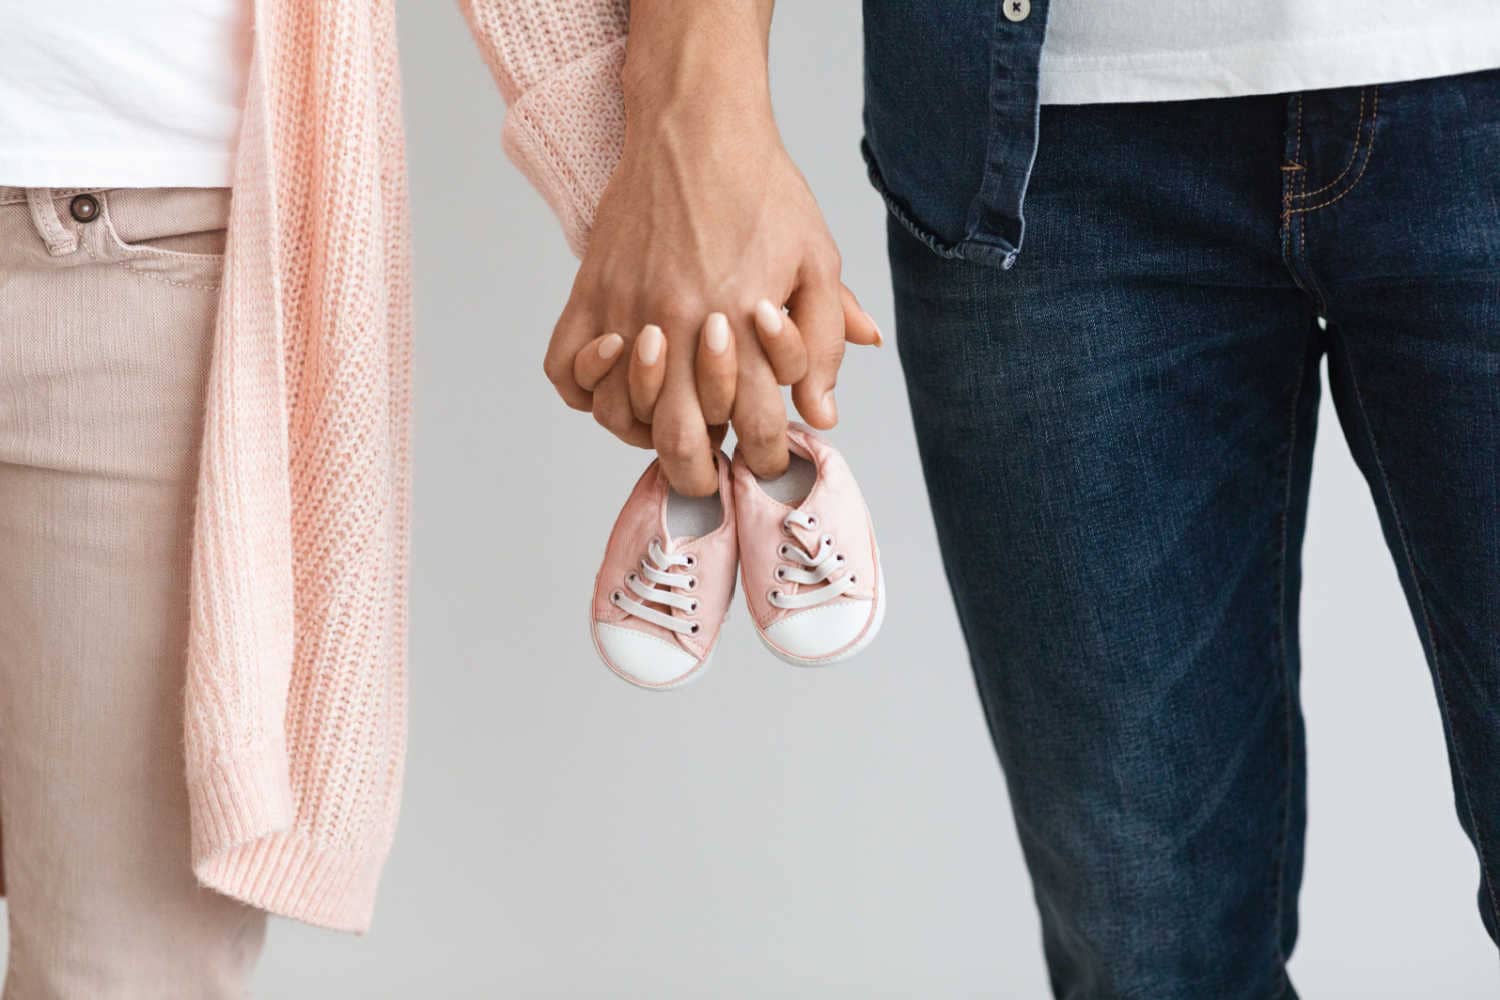 How to be a supportive husband during pregnancy